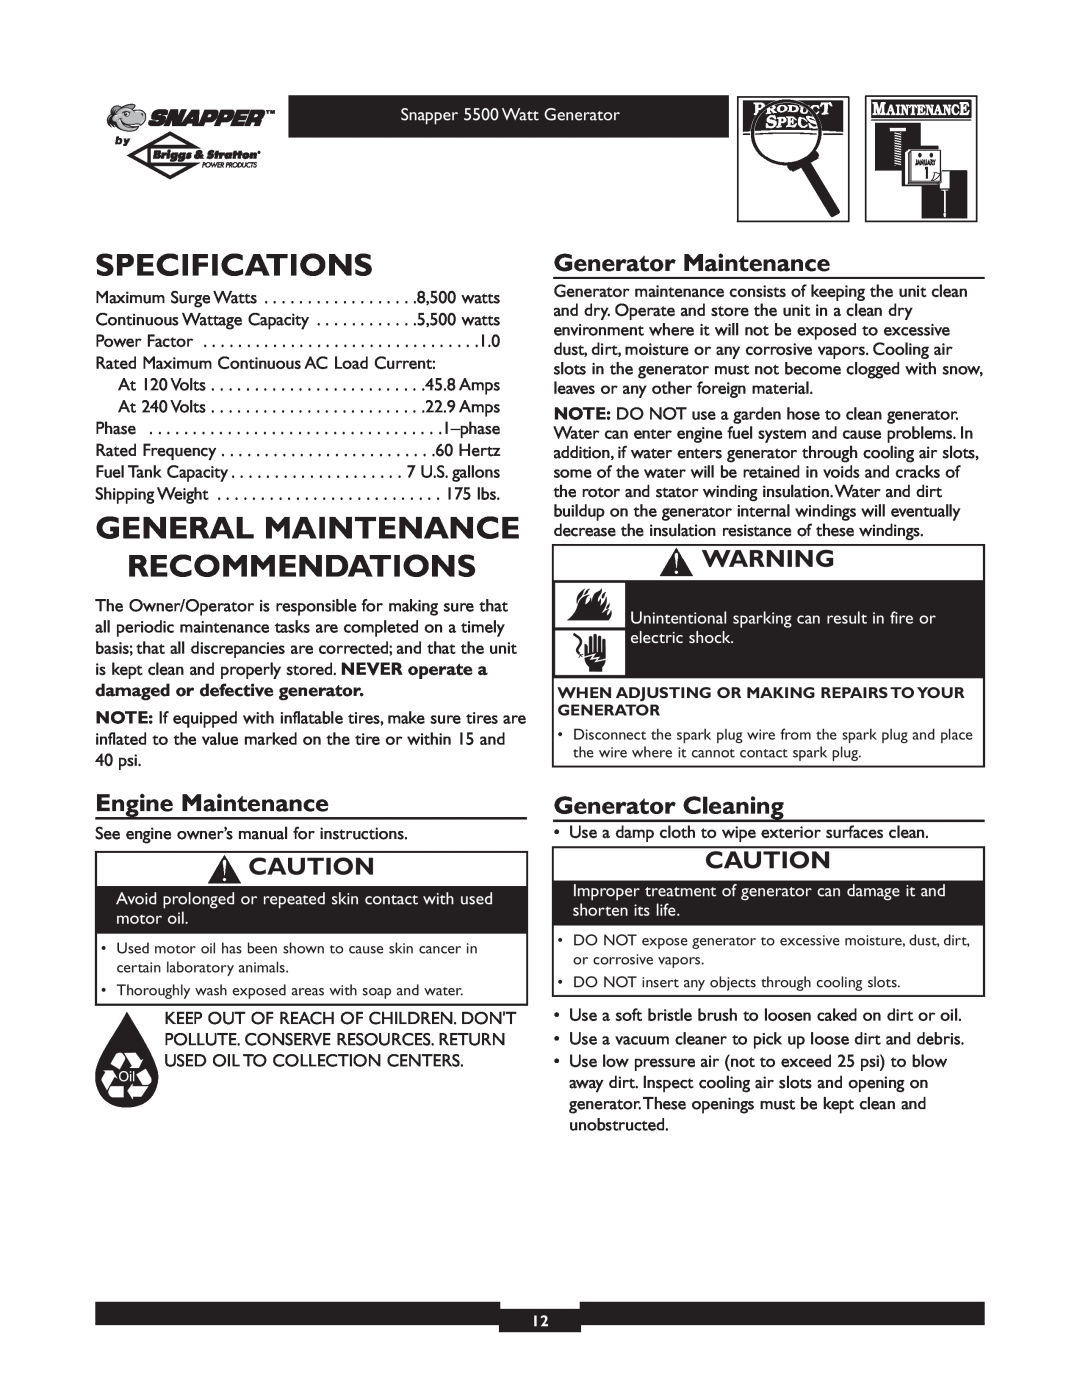 Snapper 1668-0 owner manual Specifications, General Maintenance Recommendations, Generator Maintenance, Engine Maintenance 